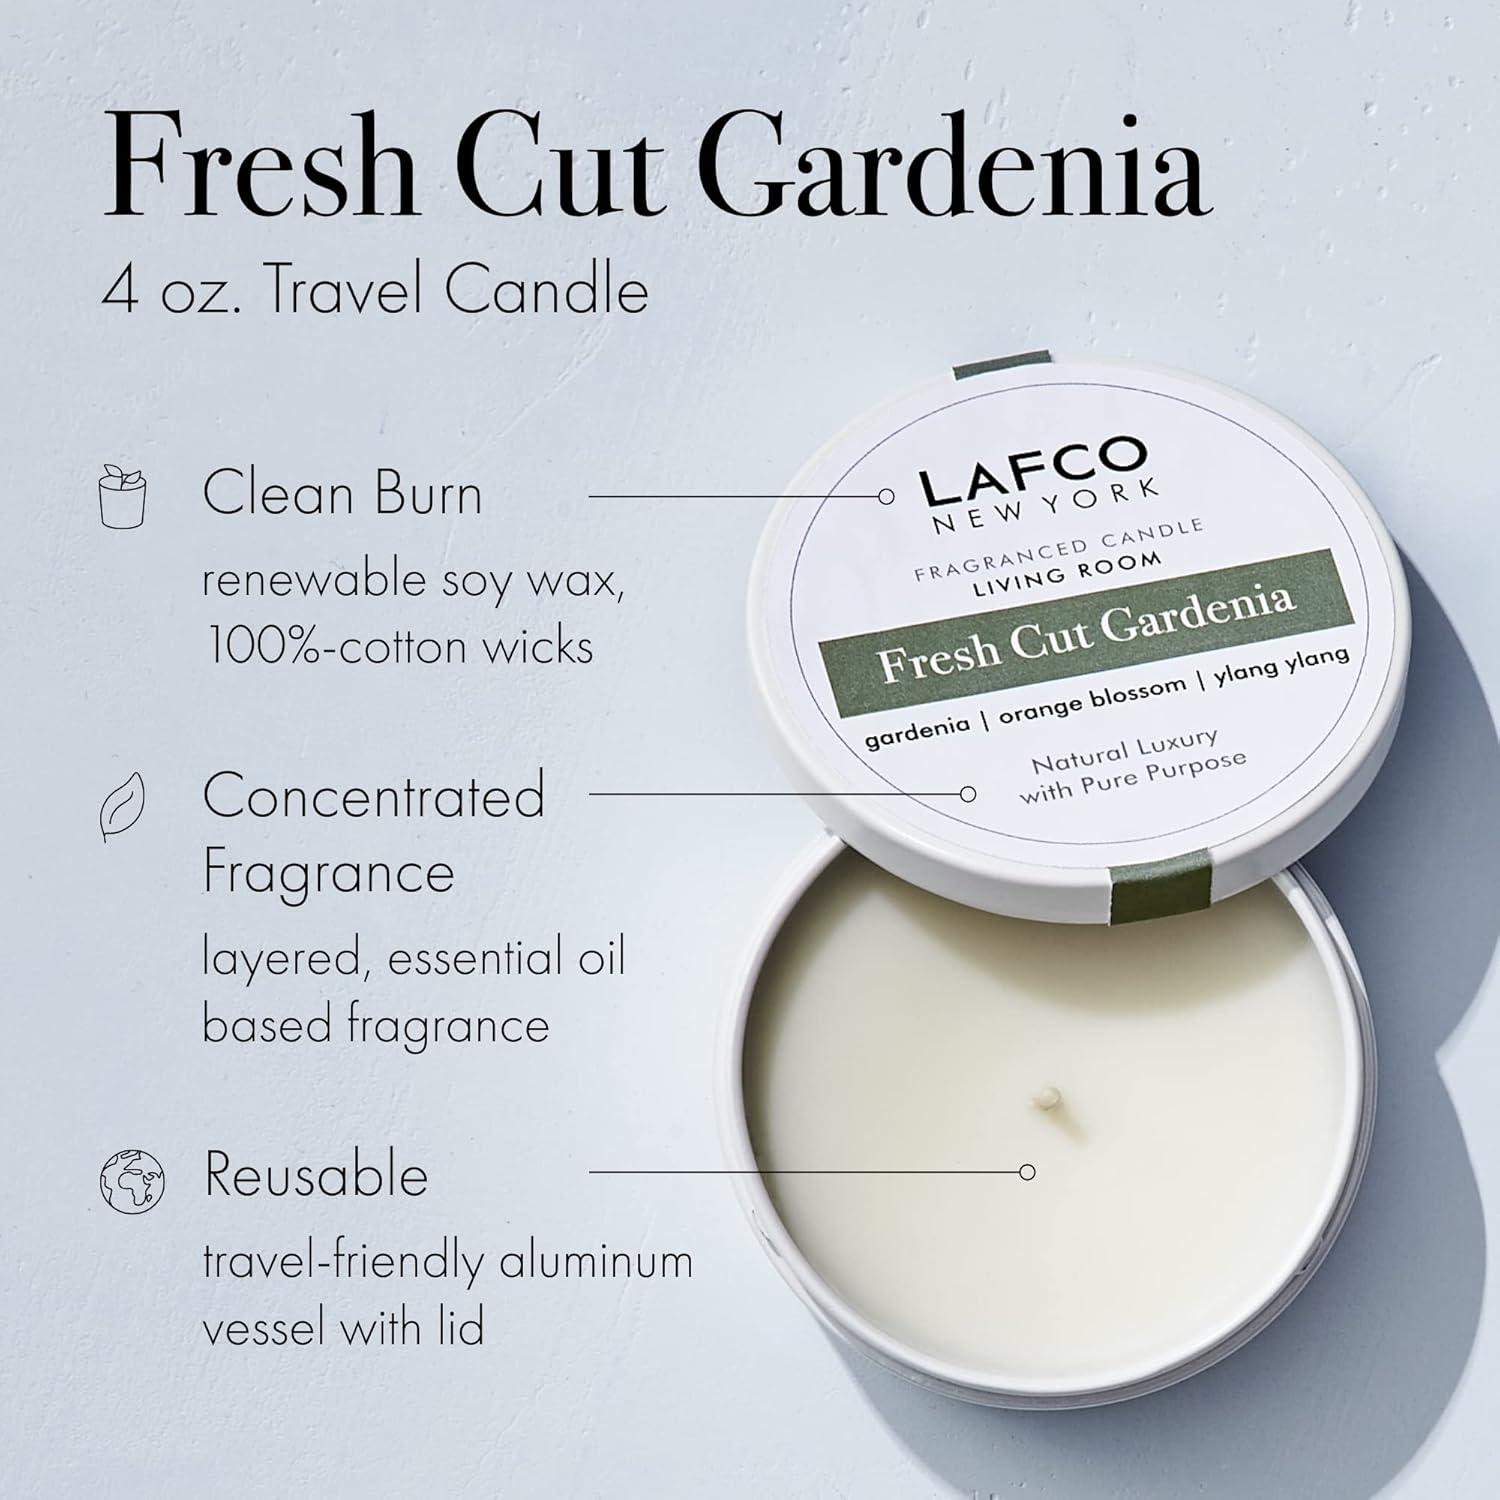 Gardenia Bliss White Soy Travel Candle with Non-Toxic Clean Burn